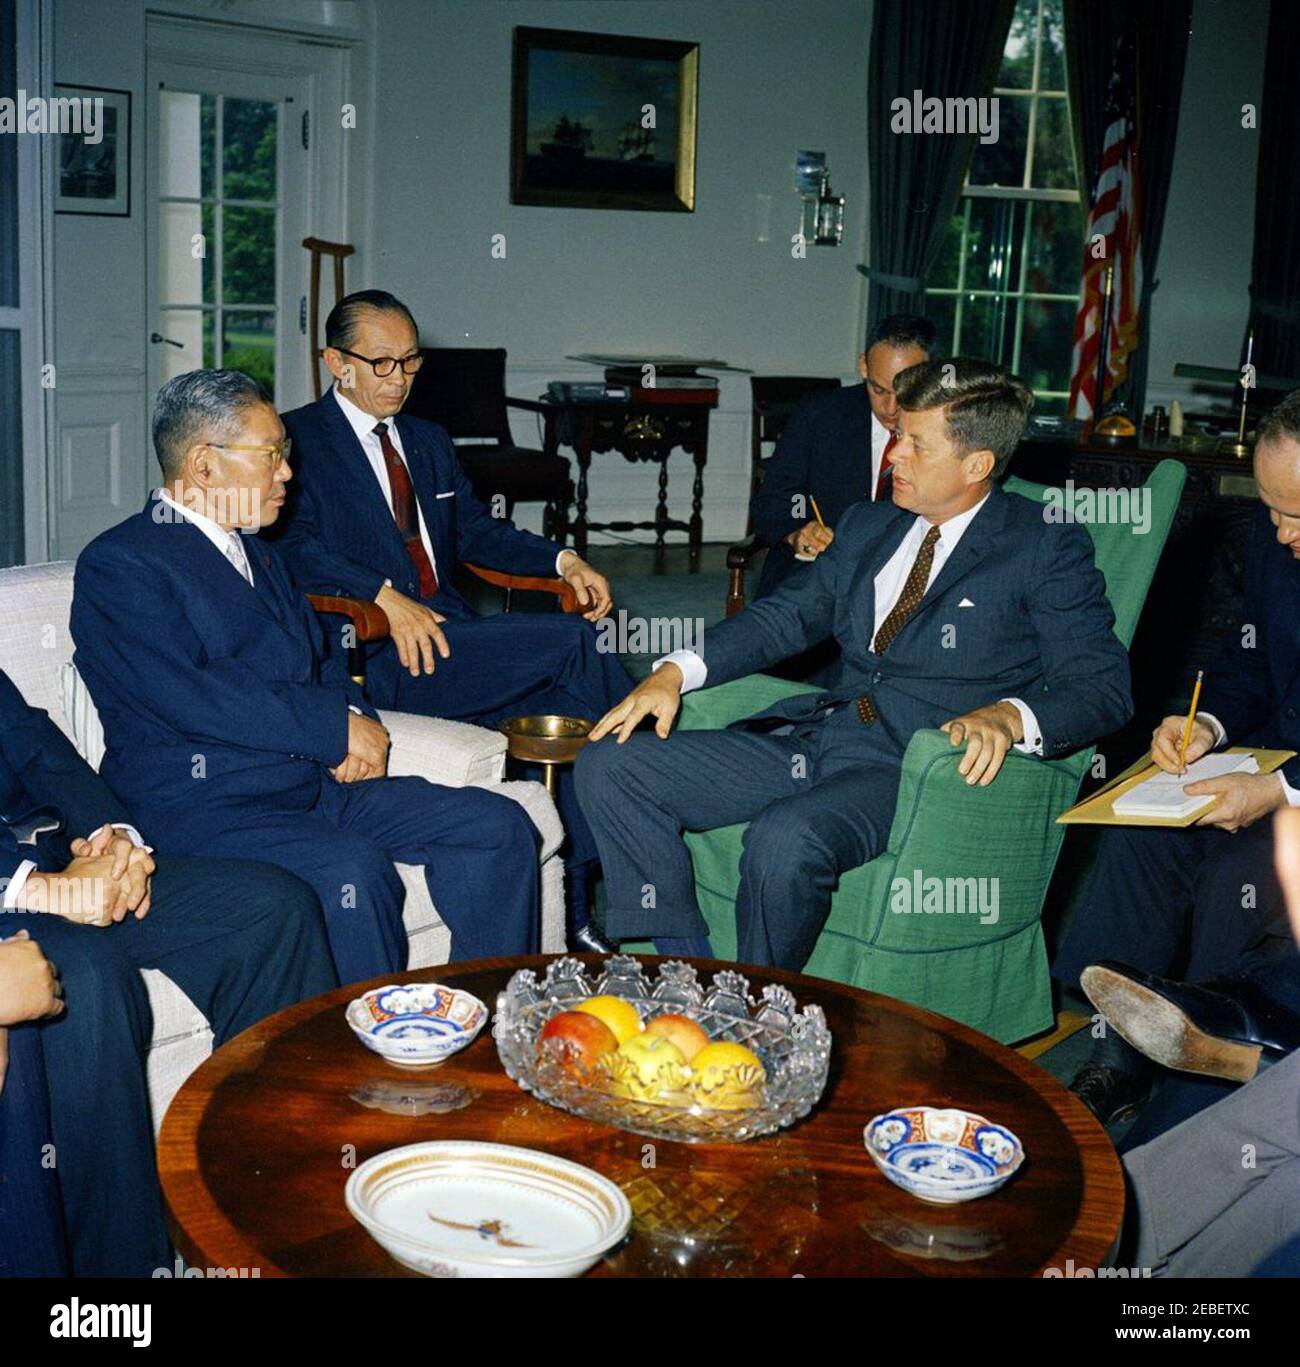 Meeting with Hayato Ikeda, the Prime Minister of Japan, 10:30AM. Meeting with the Prime Minister of Japan Hayato Ikeda. (L-R) Prime Minister Ikeda, Counselor of the Ministry of Foreign Affairs (Interpreter) Toshiro Shimanouchi, unidentified man, President John F. Kennedy, and interpreter James J. Wickel. Oval Office, White House, Washington, D.C. Stock Photo